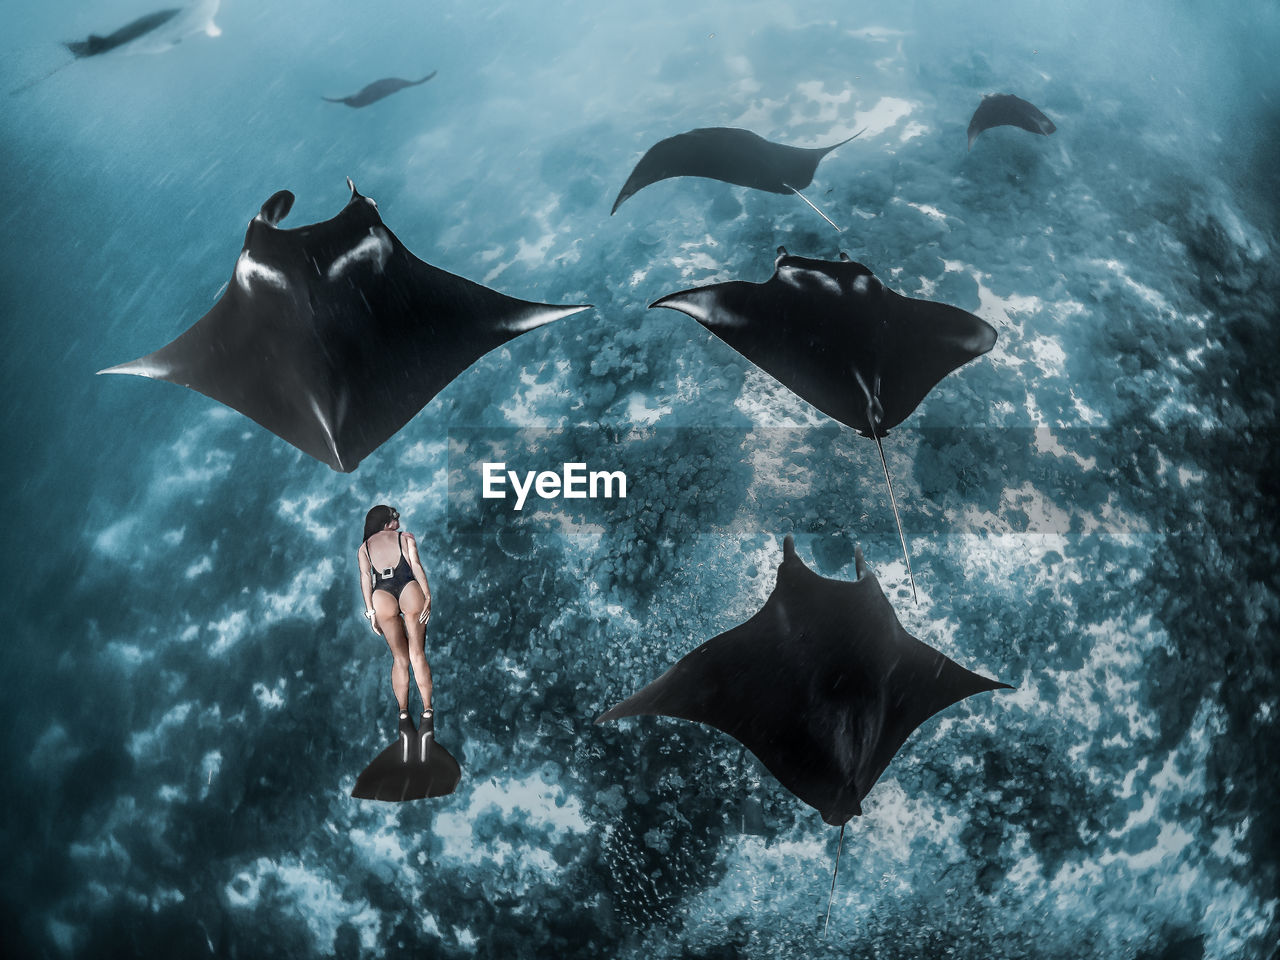 DIGITAL COMPOSITE IMAGE OF PERSON SWIMMING